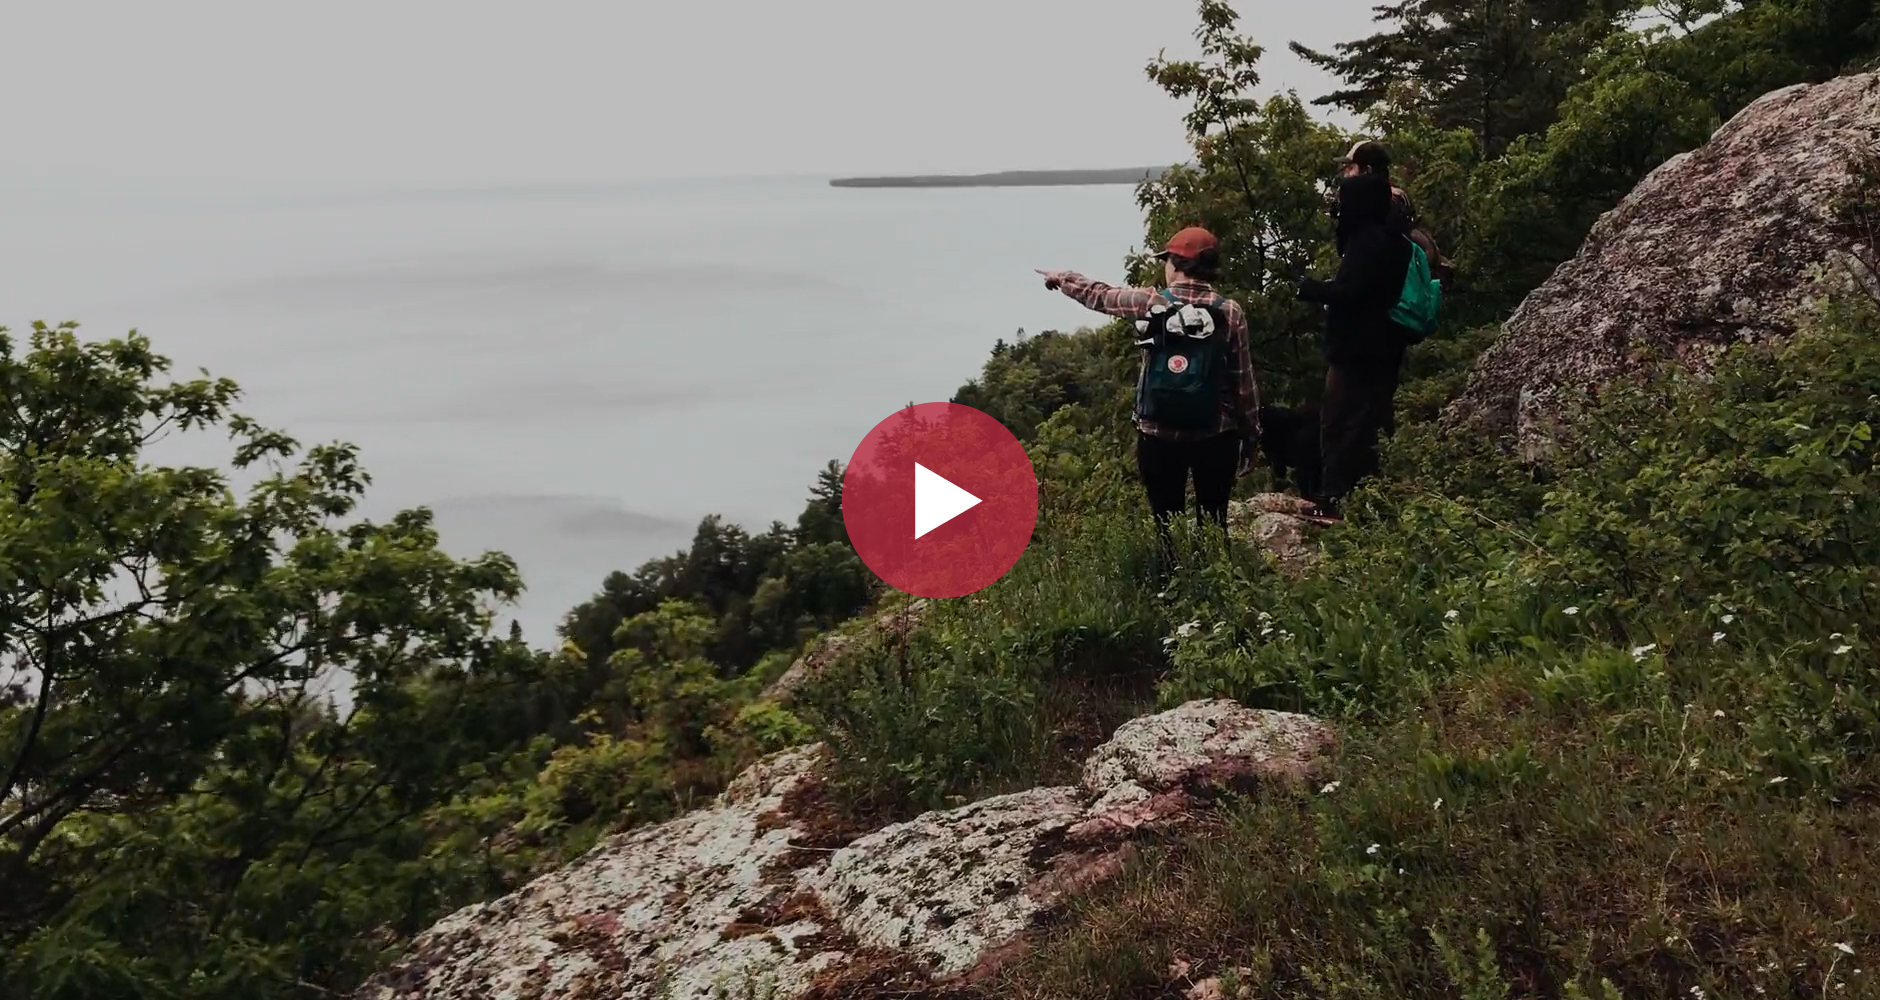 Keweenaw Peninsula in the summer video by Brockit Photography